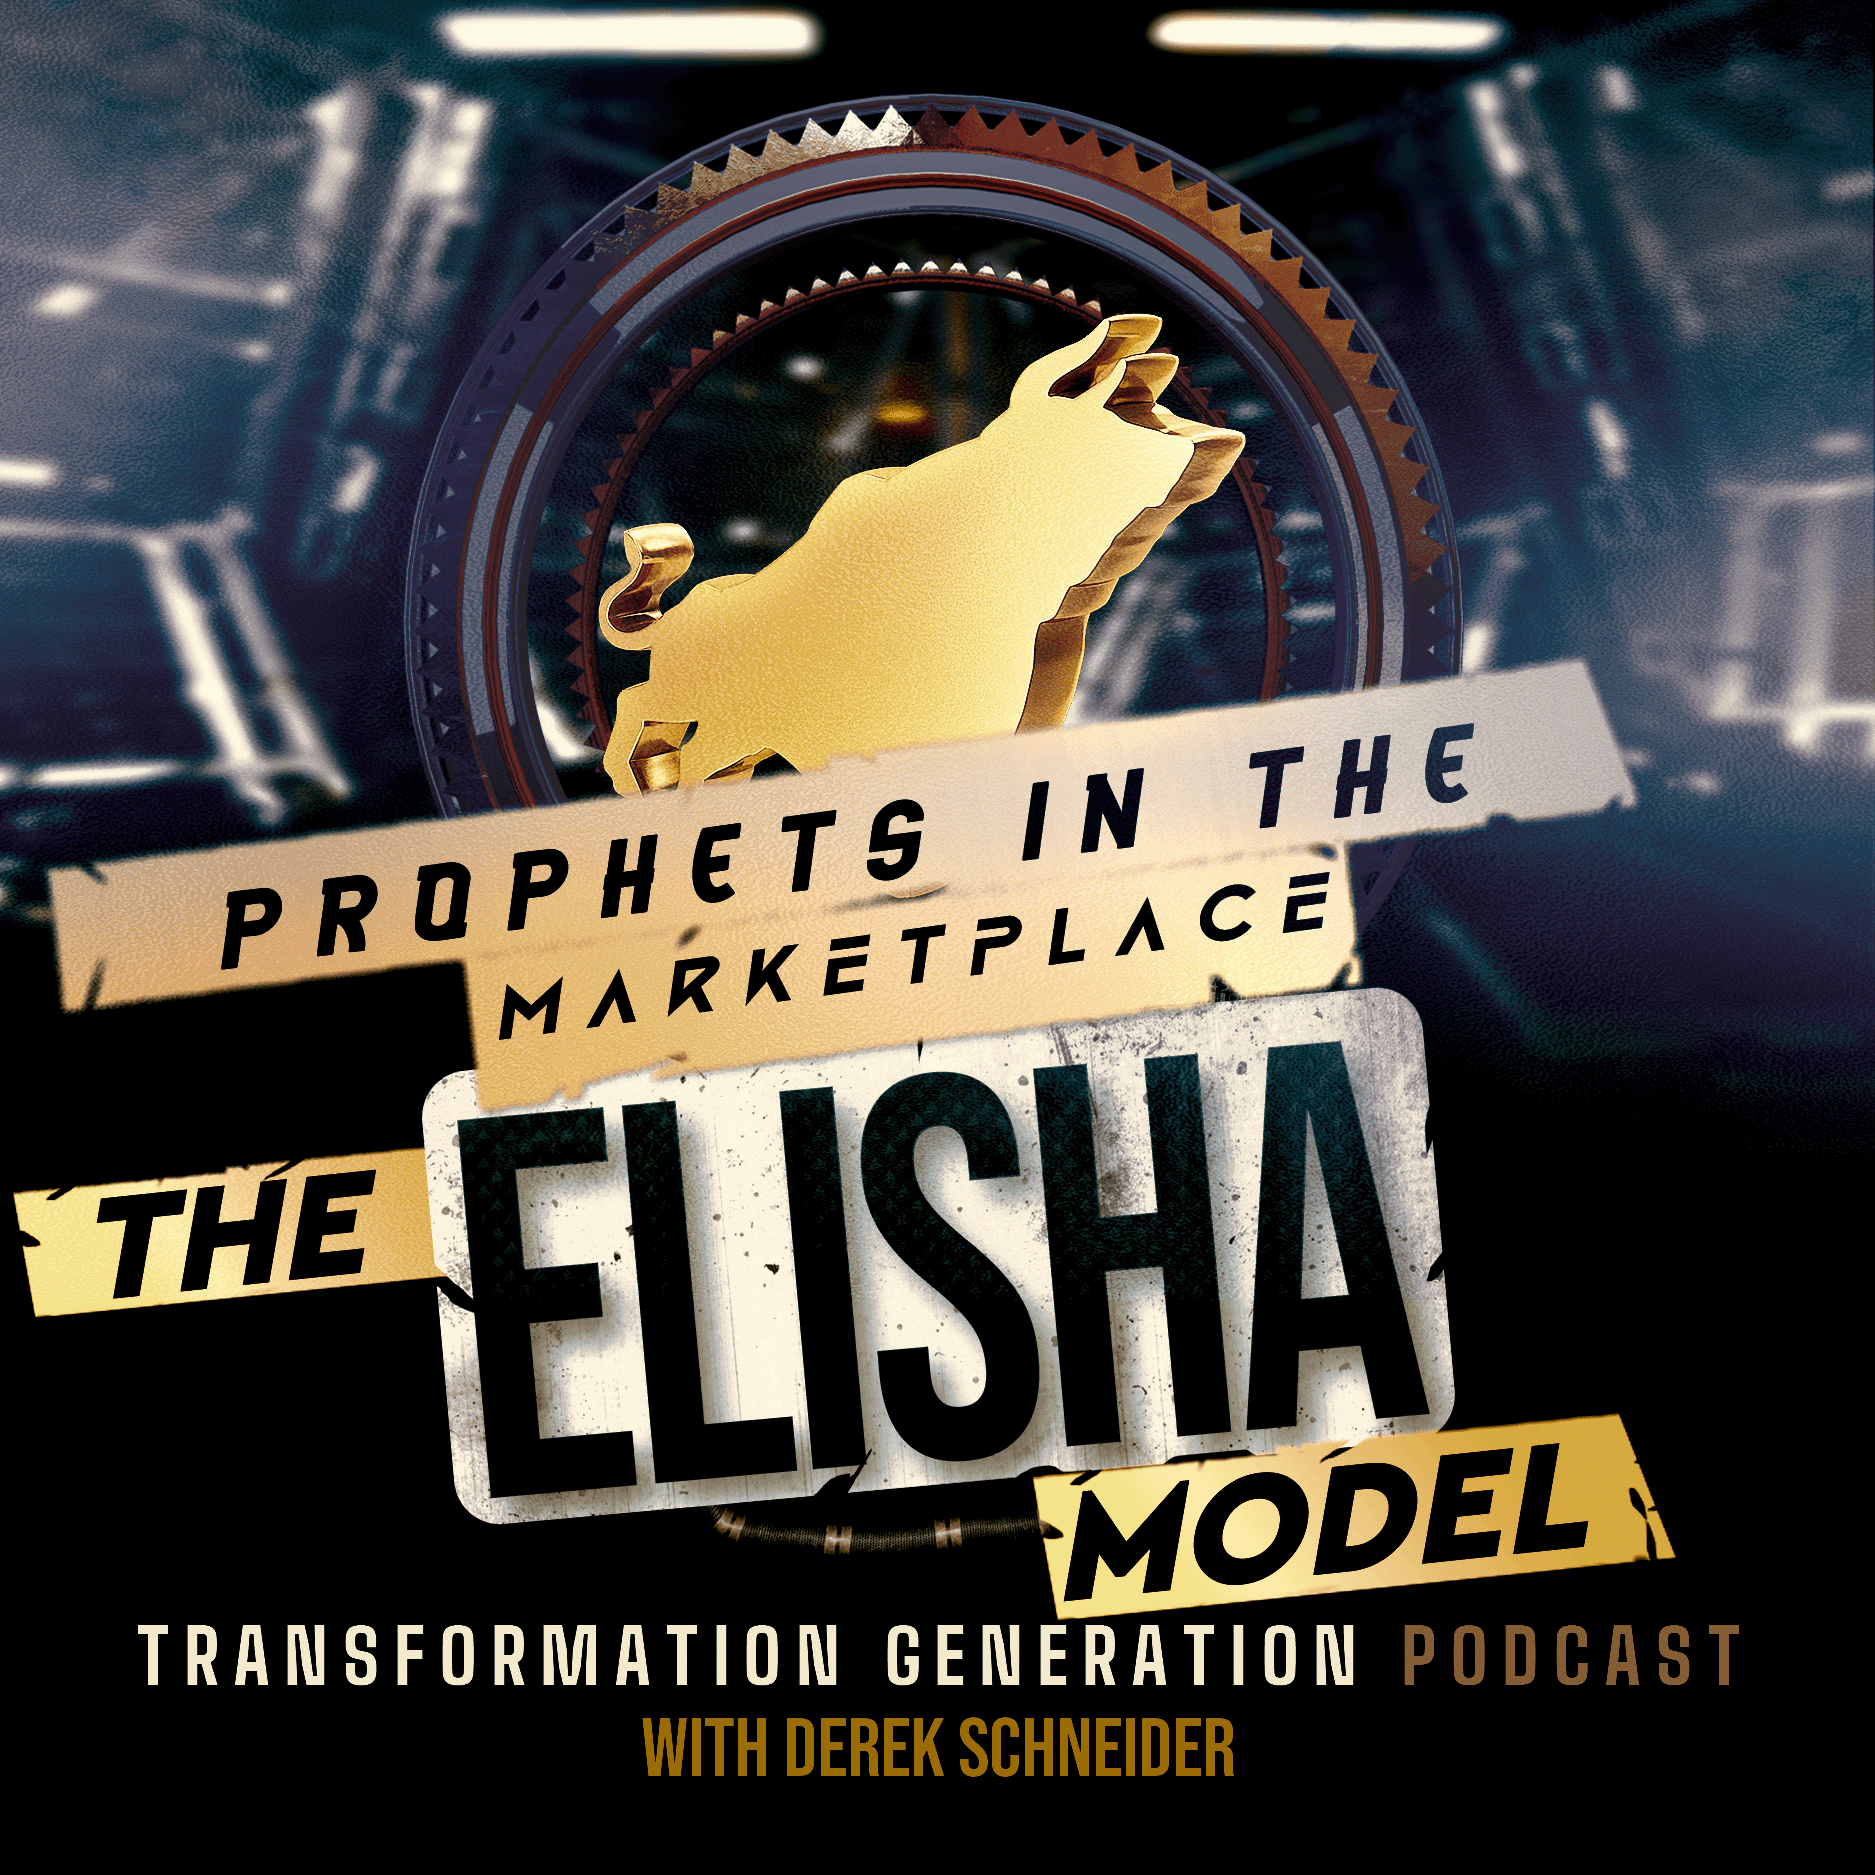 Prophets in the Marketplace - The Elisha Model